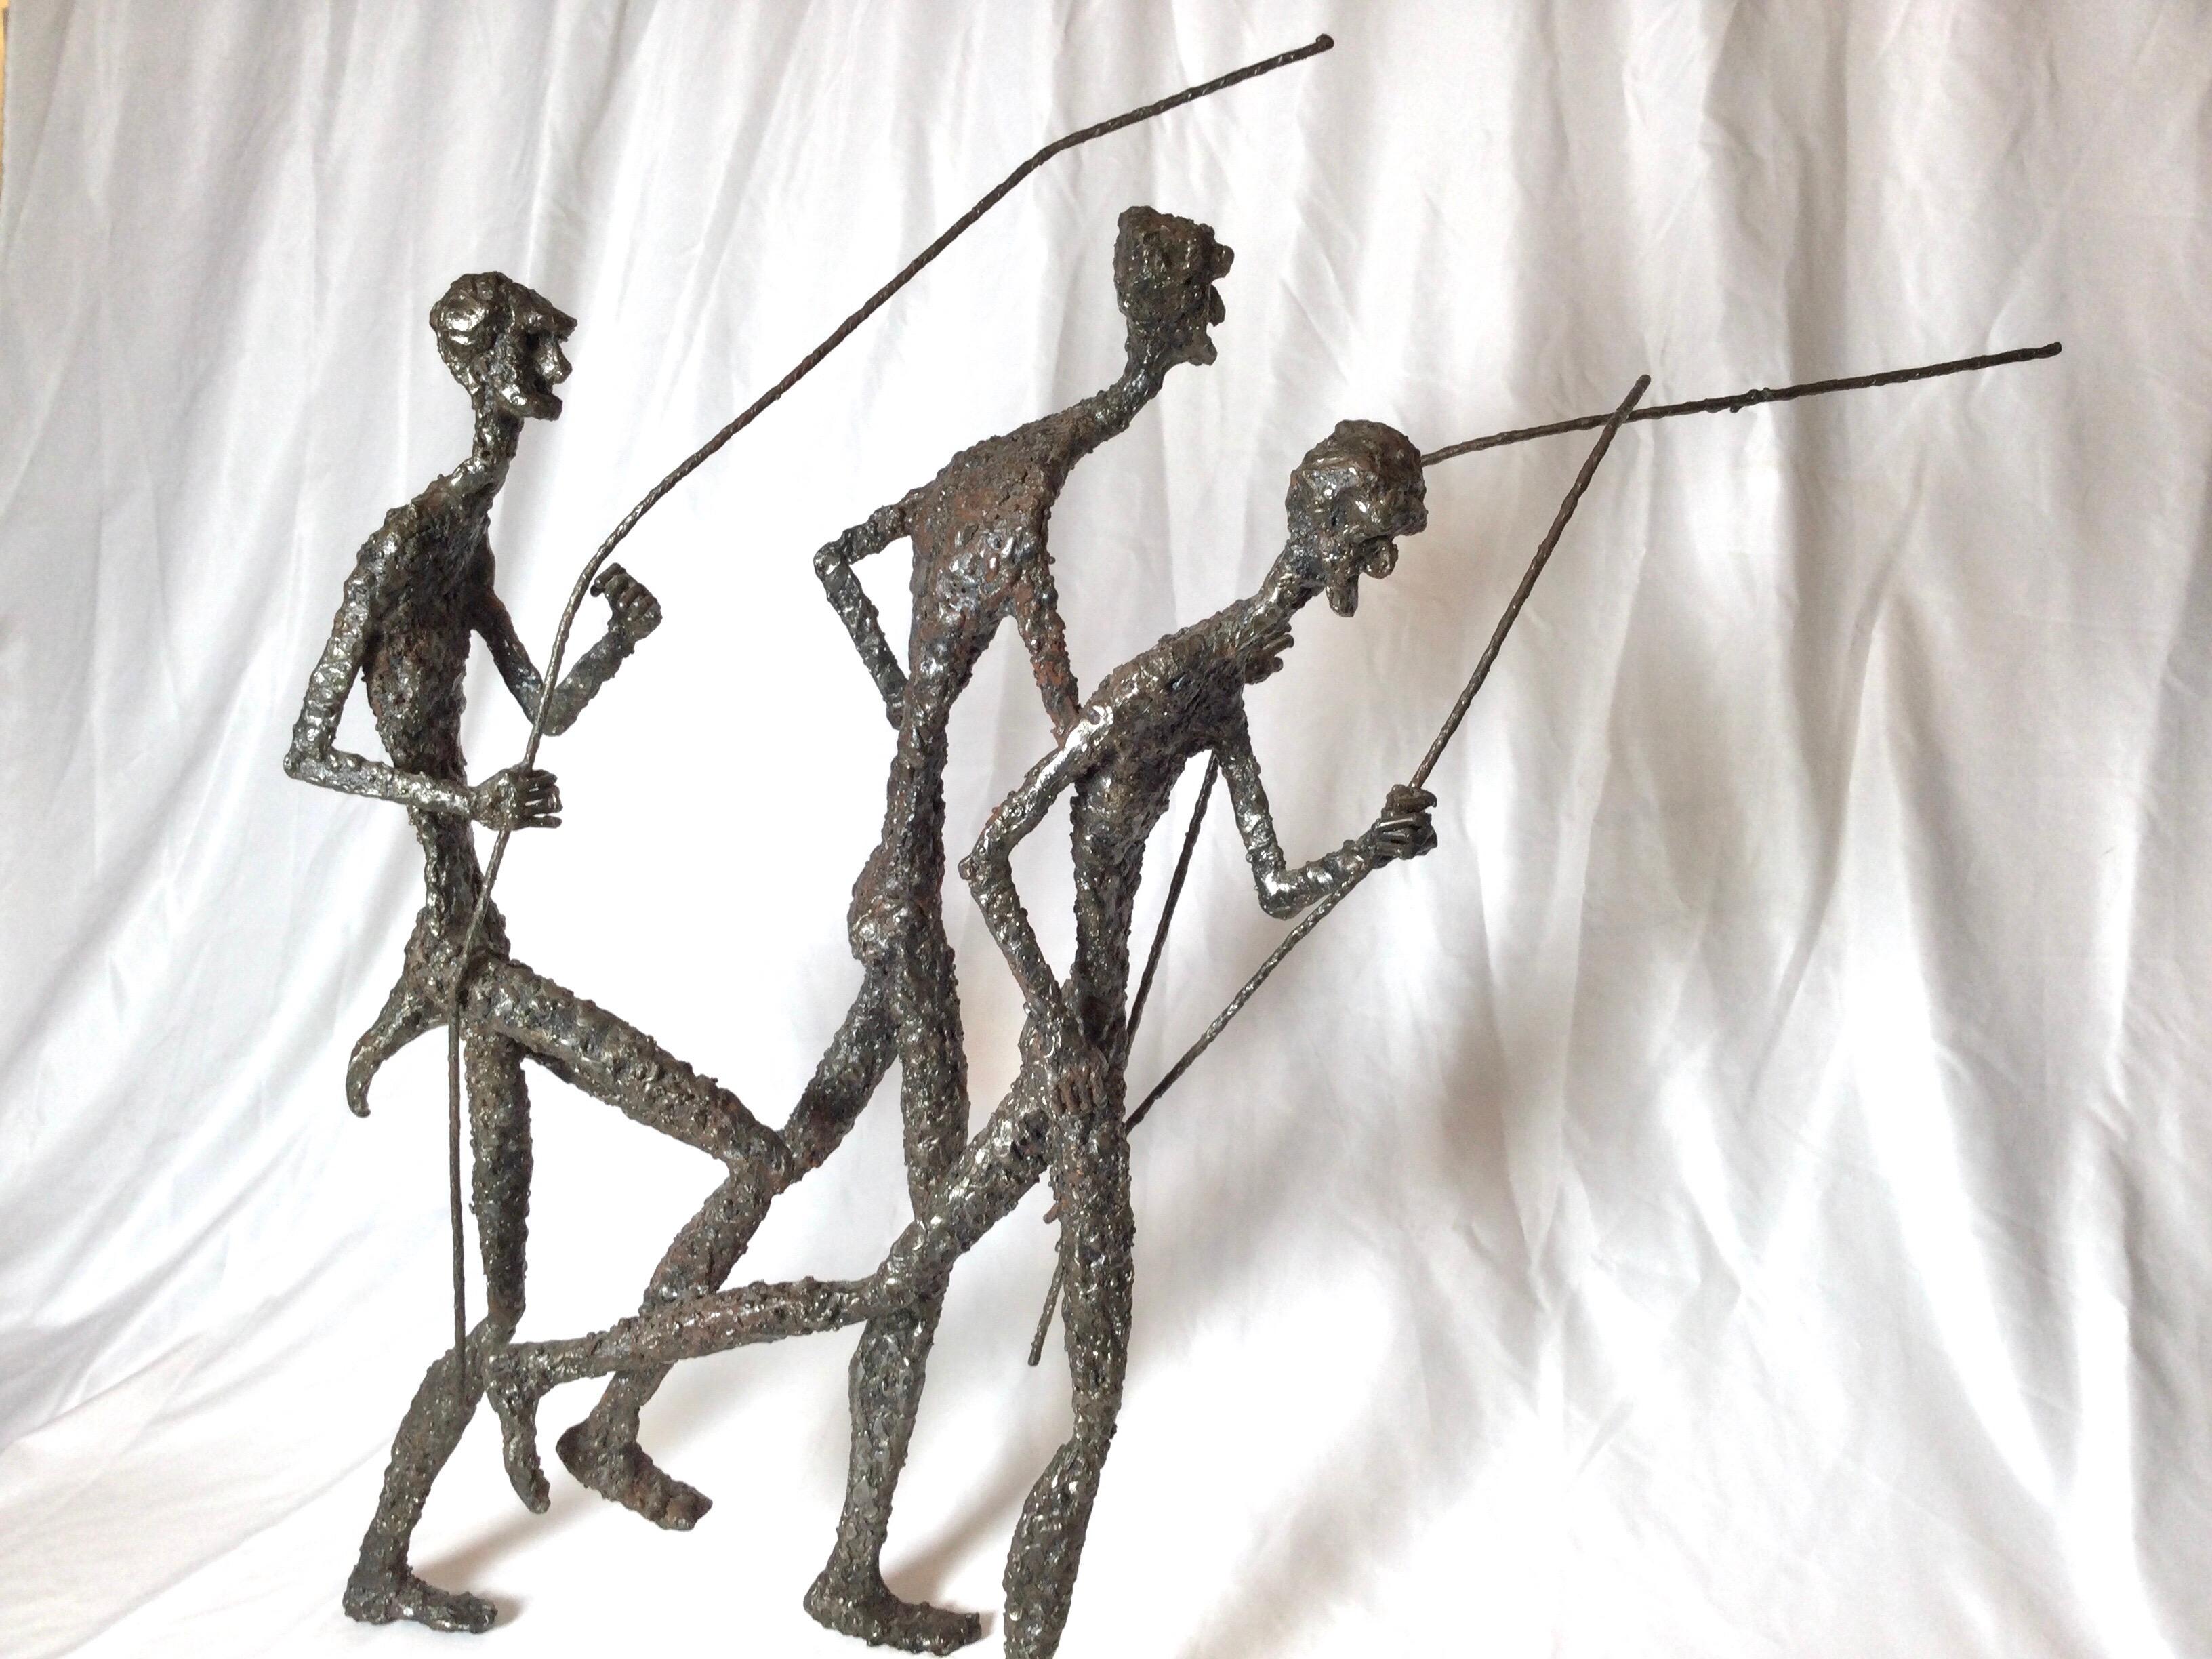 The sculpture with three figures in motion with shafts and hunting spears. The heavy metal sculpture is probably steel. Attributed to Daniel Gluck who is an American artist and furniture designer who was born in the 20th century.